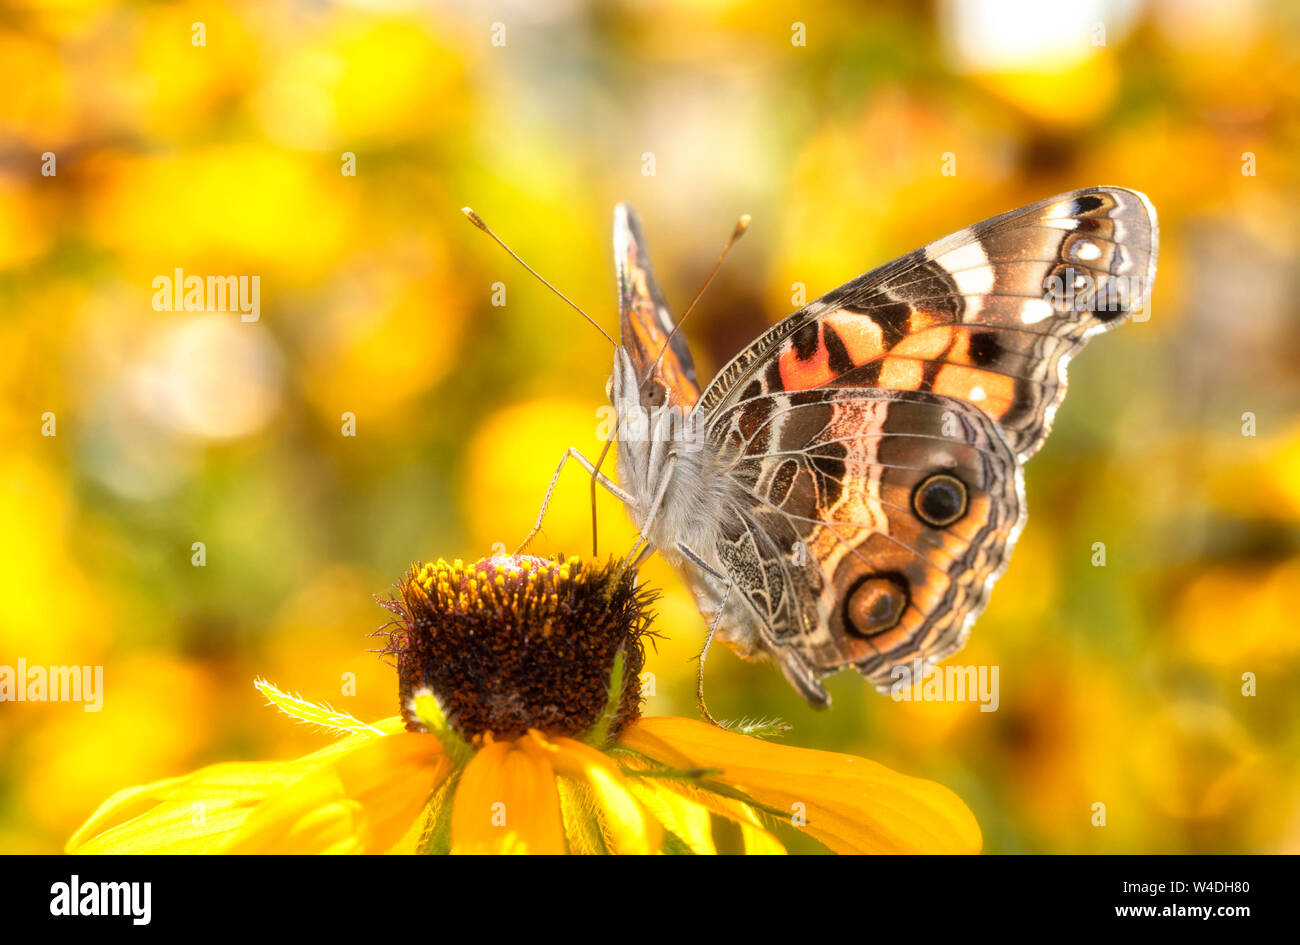 American Painted lady butterfly feeding on a Black-eyed Susan flower, with bright yellow floral background Stock Photo